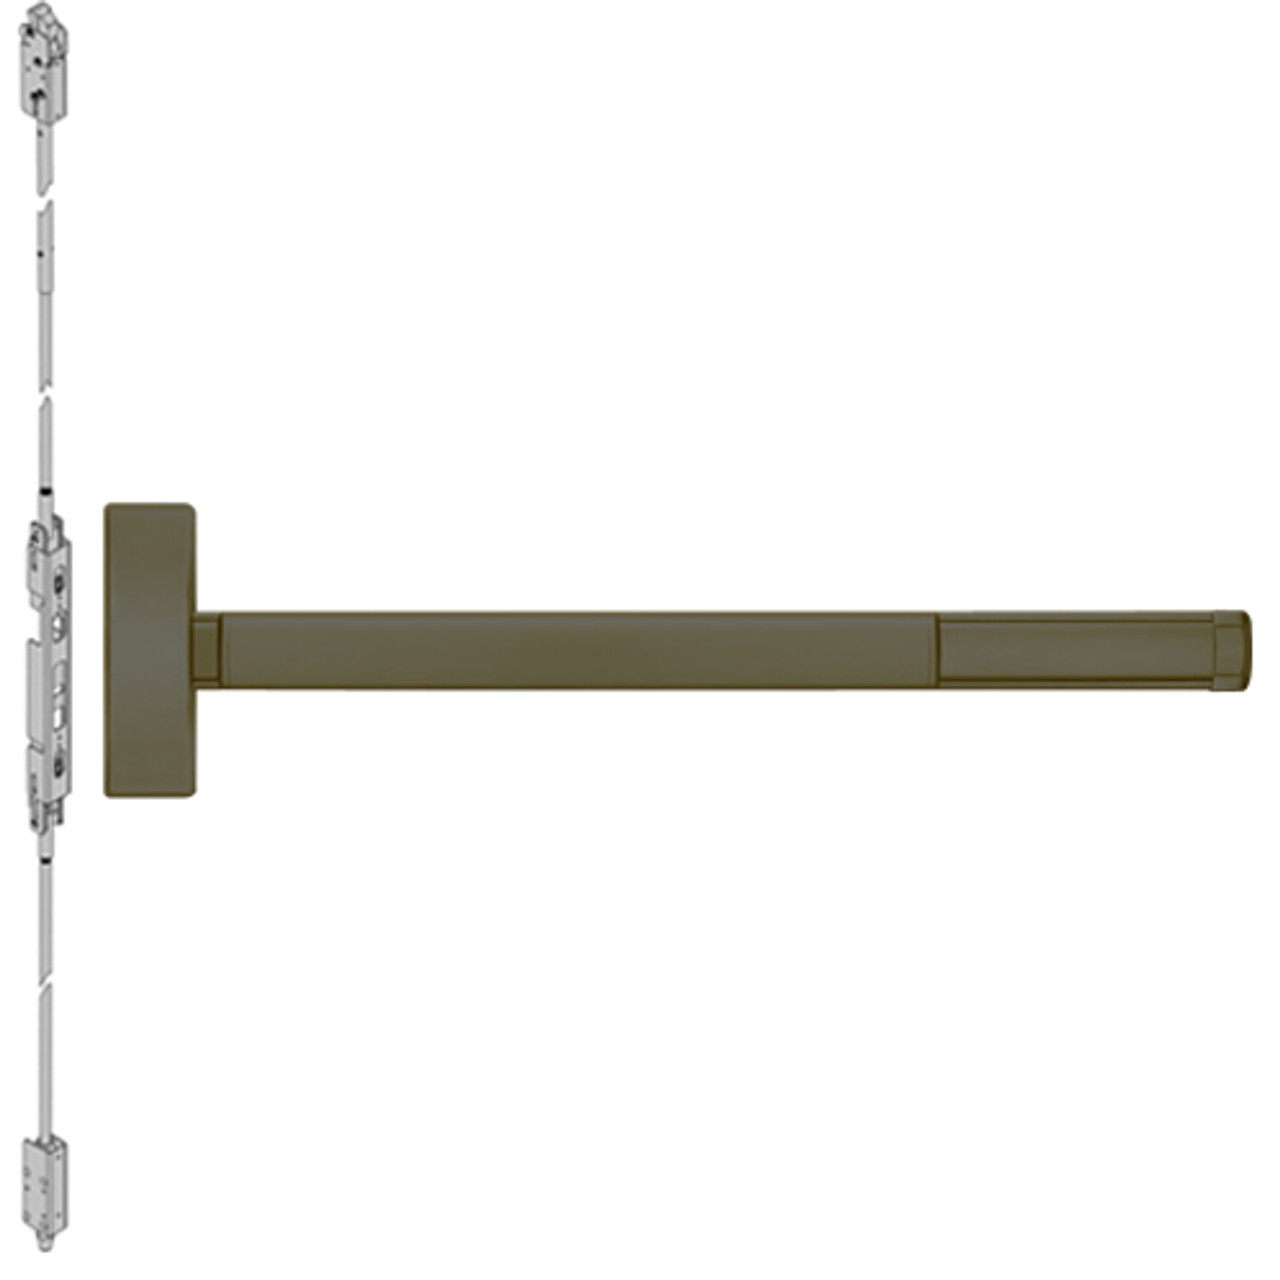 ELRFL2801LBR-613-36 PHI 2800 Series Fire Rated Concealed Vertical Rod Exit Device with Electric Latch Retraction Prepped for Cover Plate in Oil Rubbed Bronze Finish